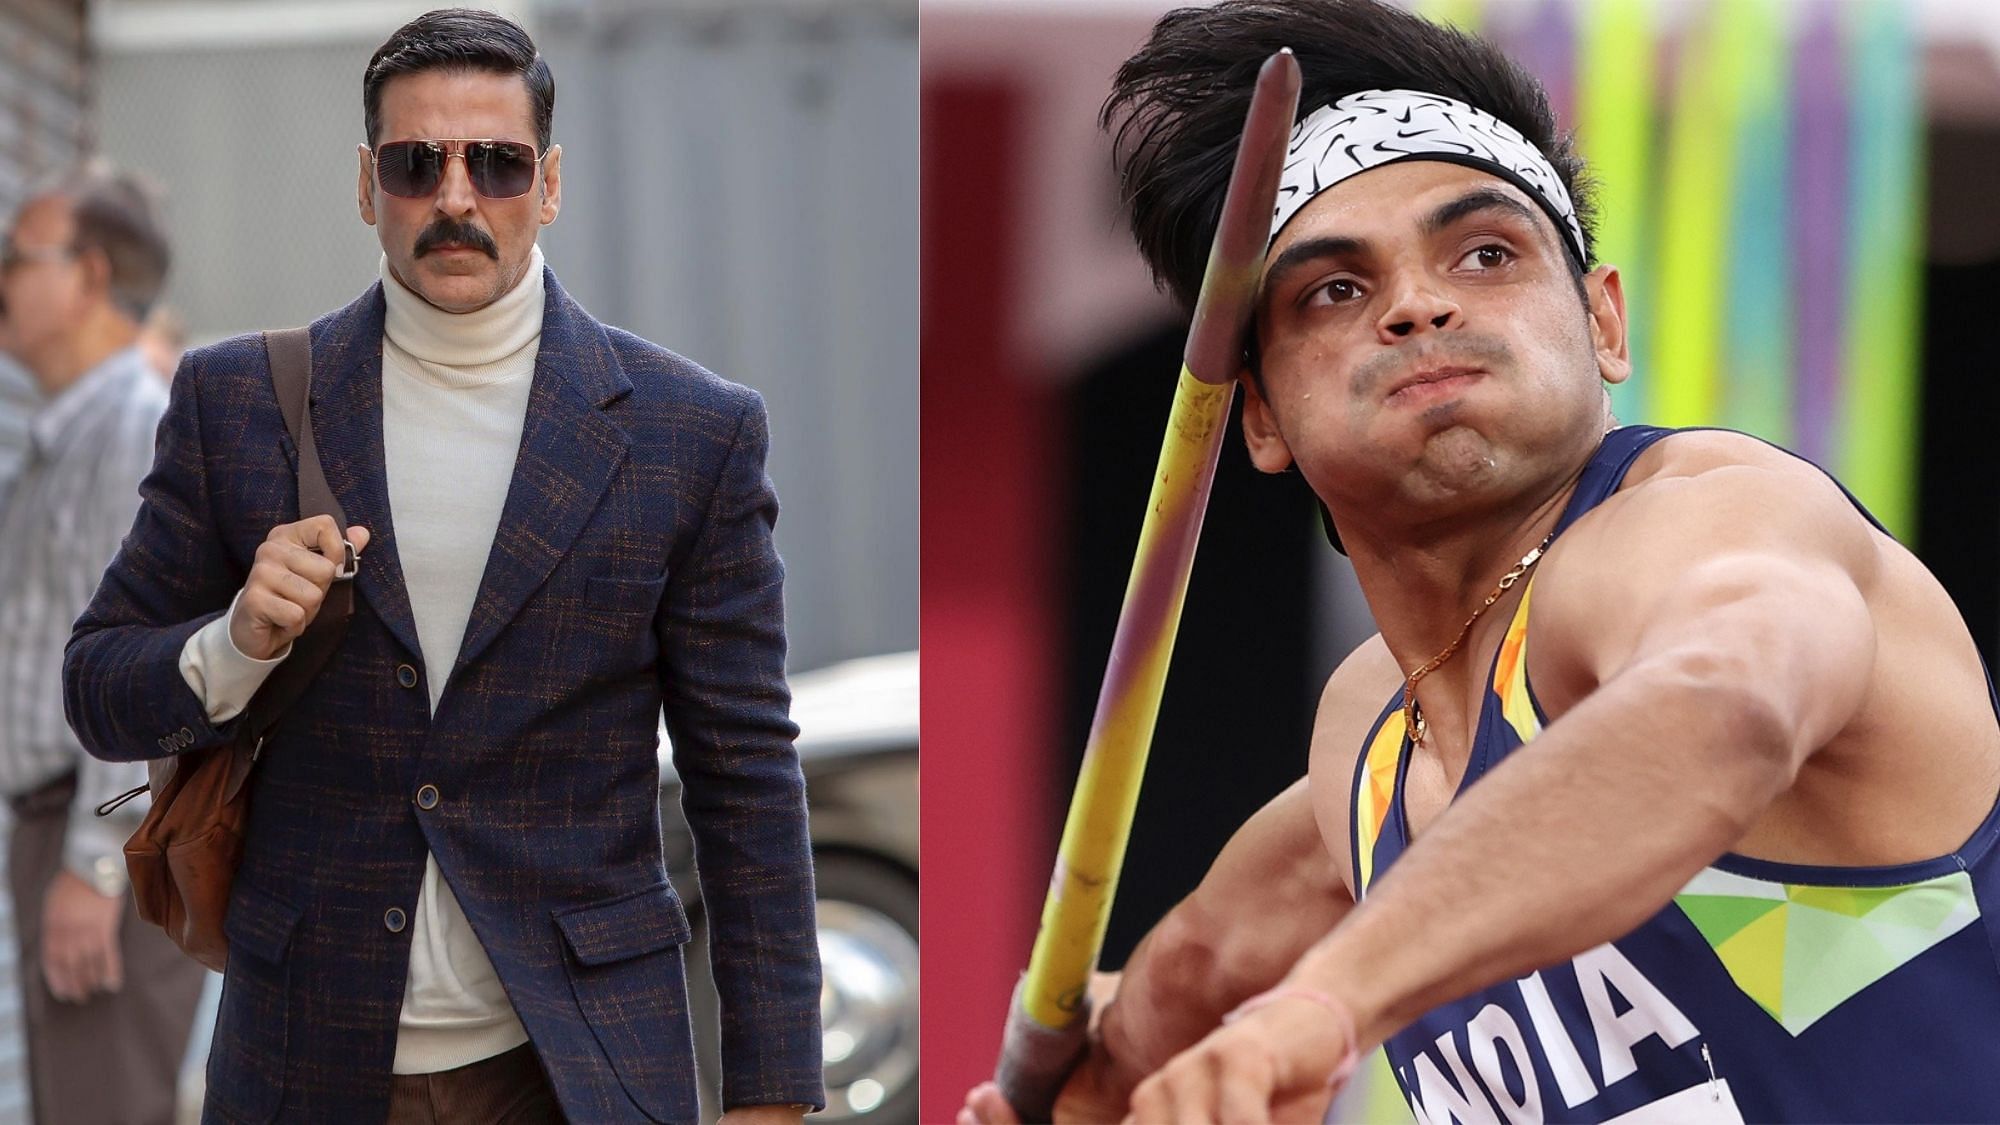 <div class="paragraphs"><p>Akshay Kumar speaks about a meme featuring him after Neeraj Chopra's win in the Tokyo Olympics.&nbsp;</p></div>